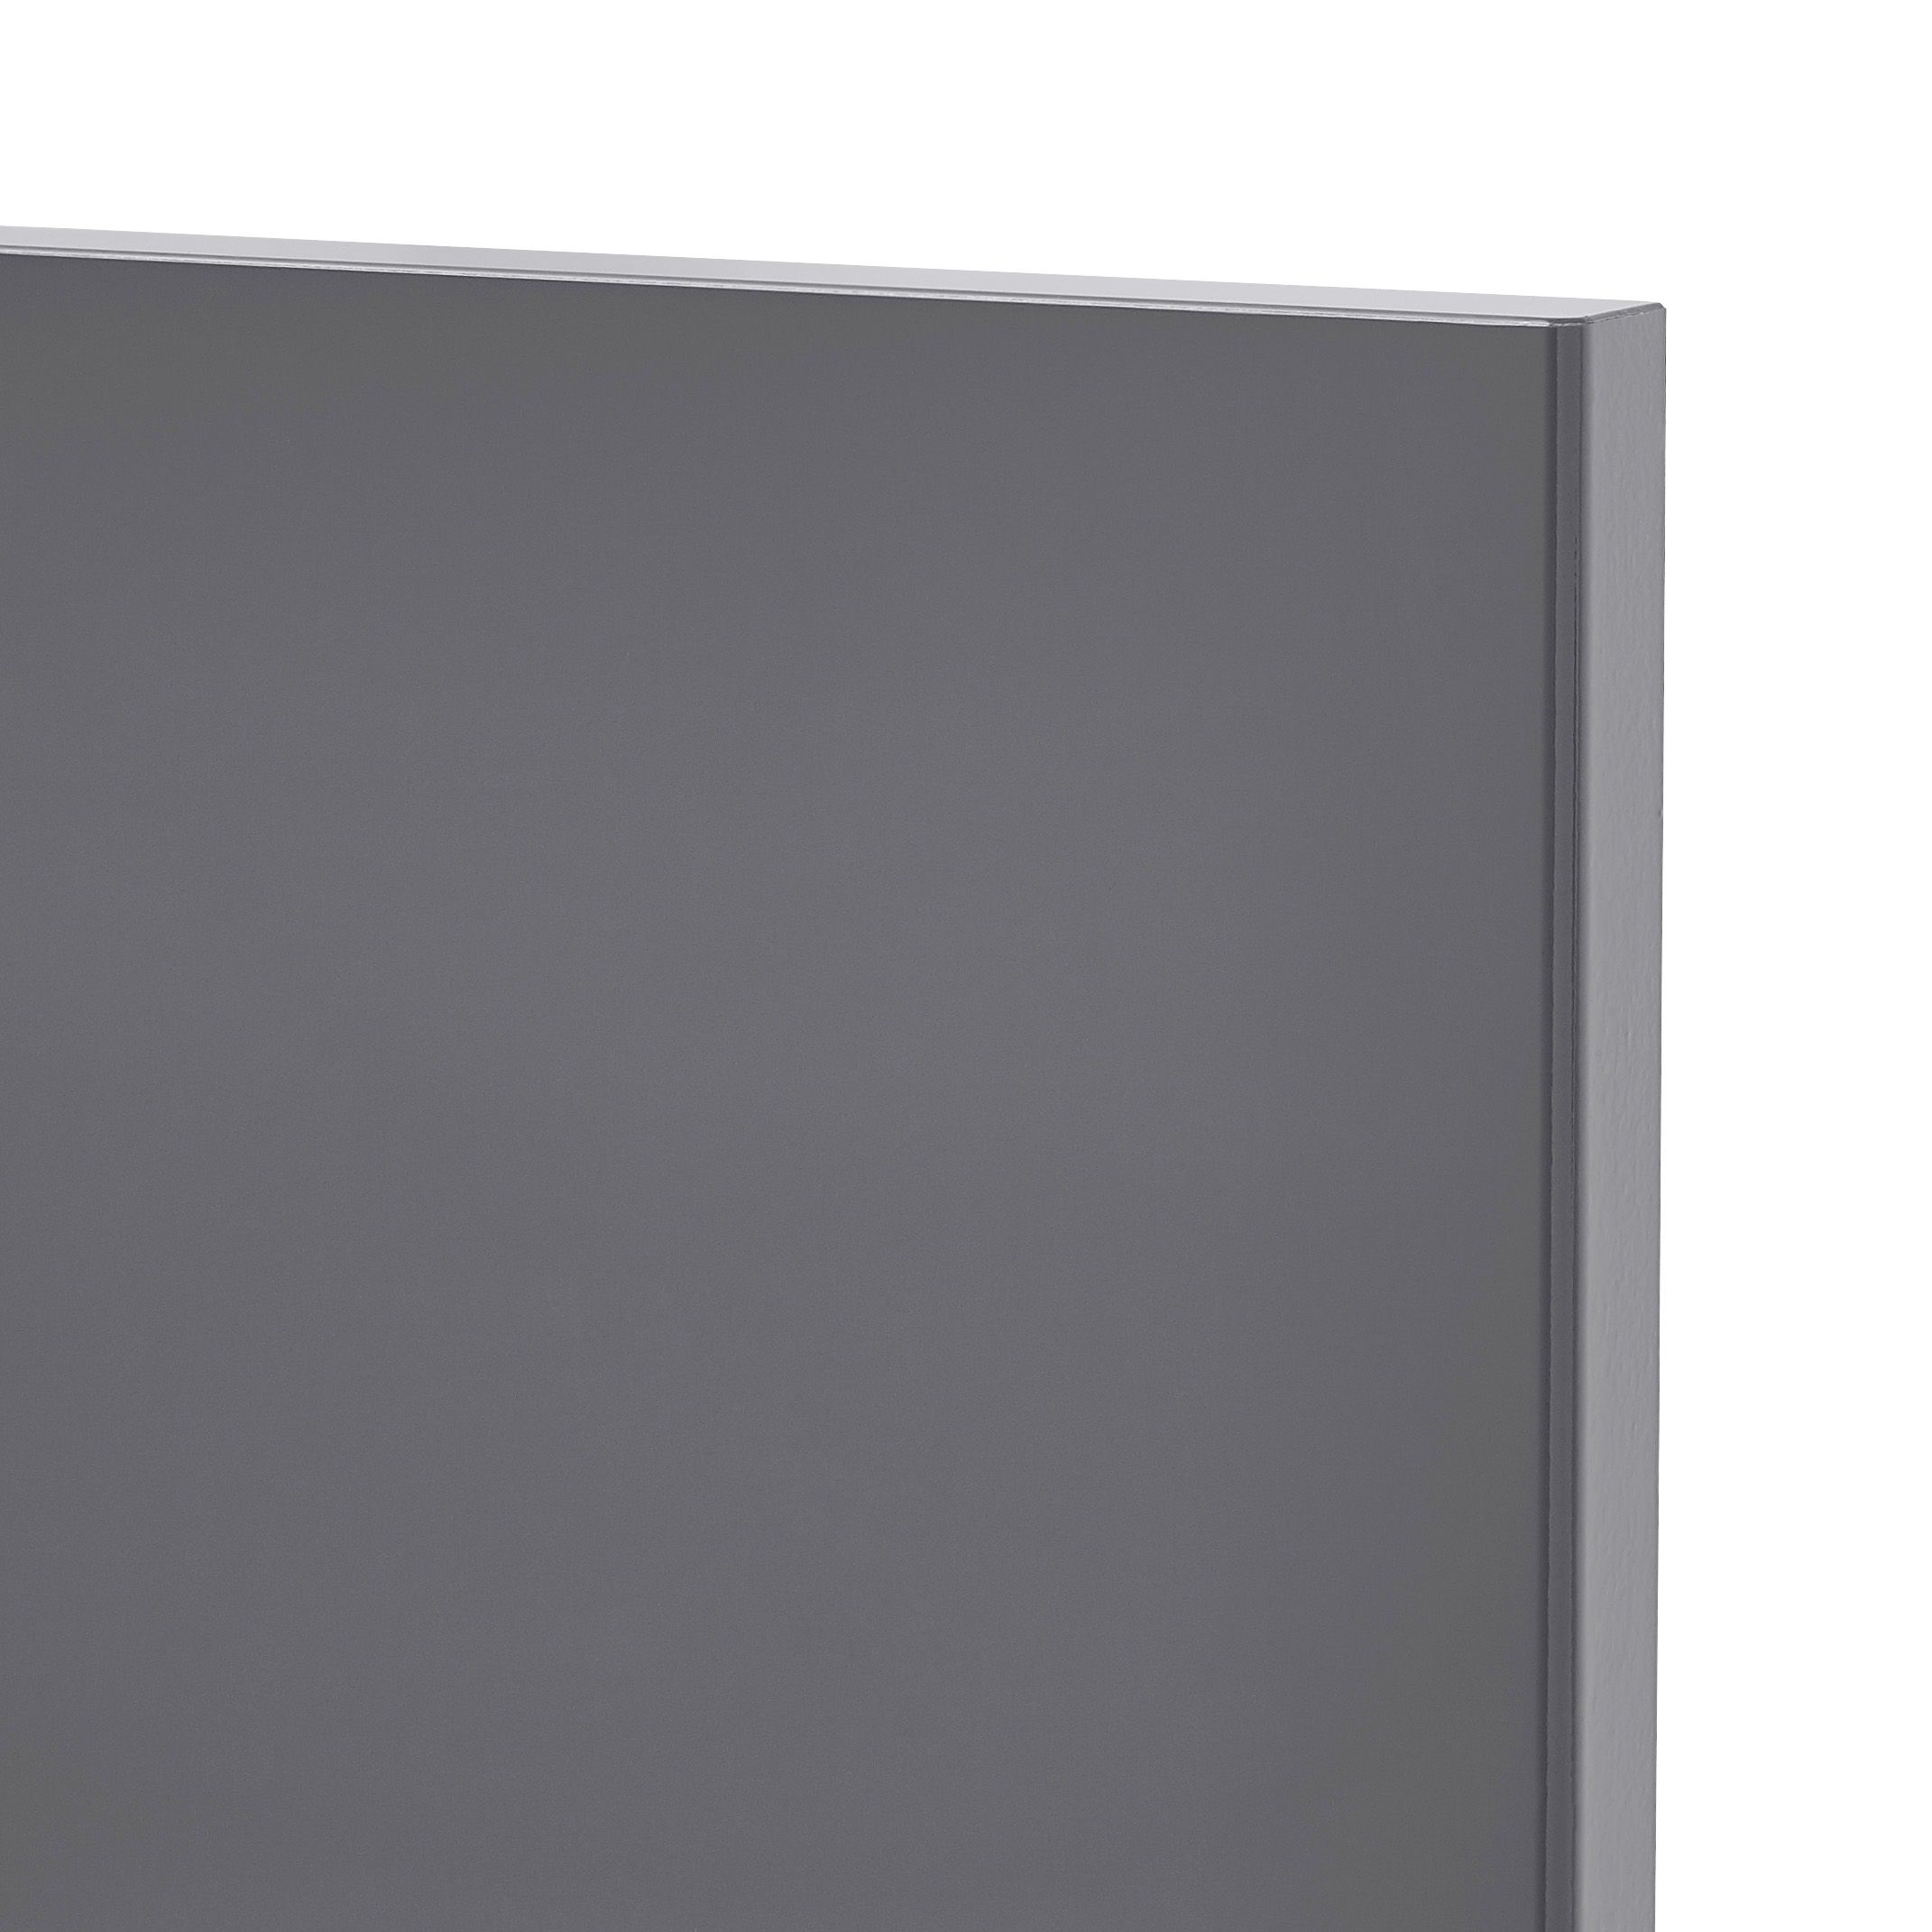 GoodHome Stevia Gloss anthracite slab Appliance Cabinet door (W)600mm (H)543mm (T)18mm